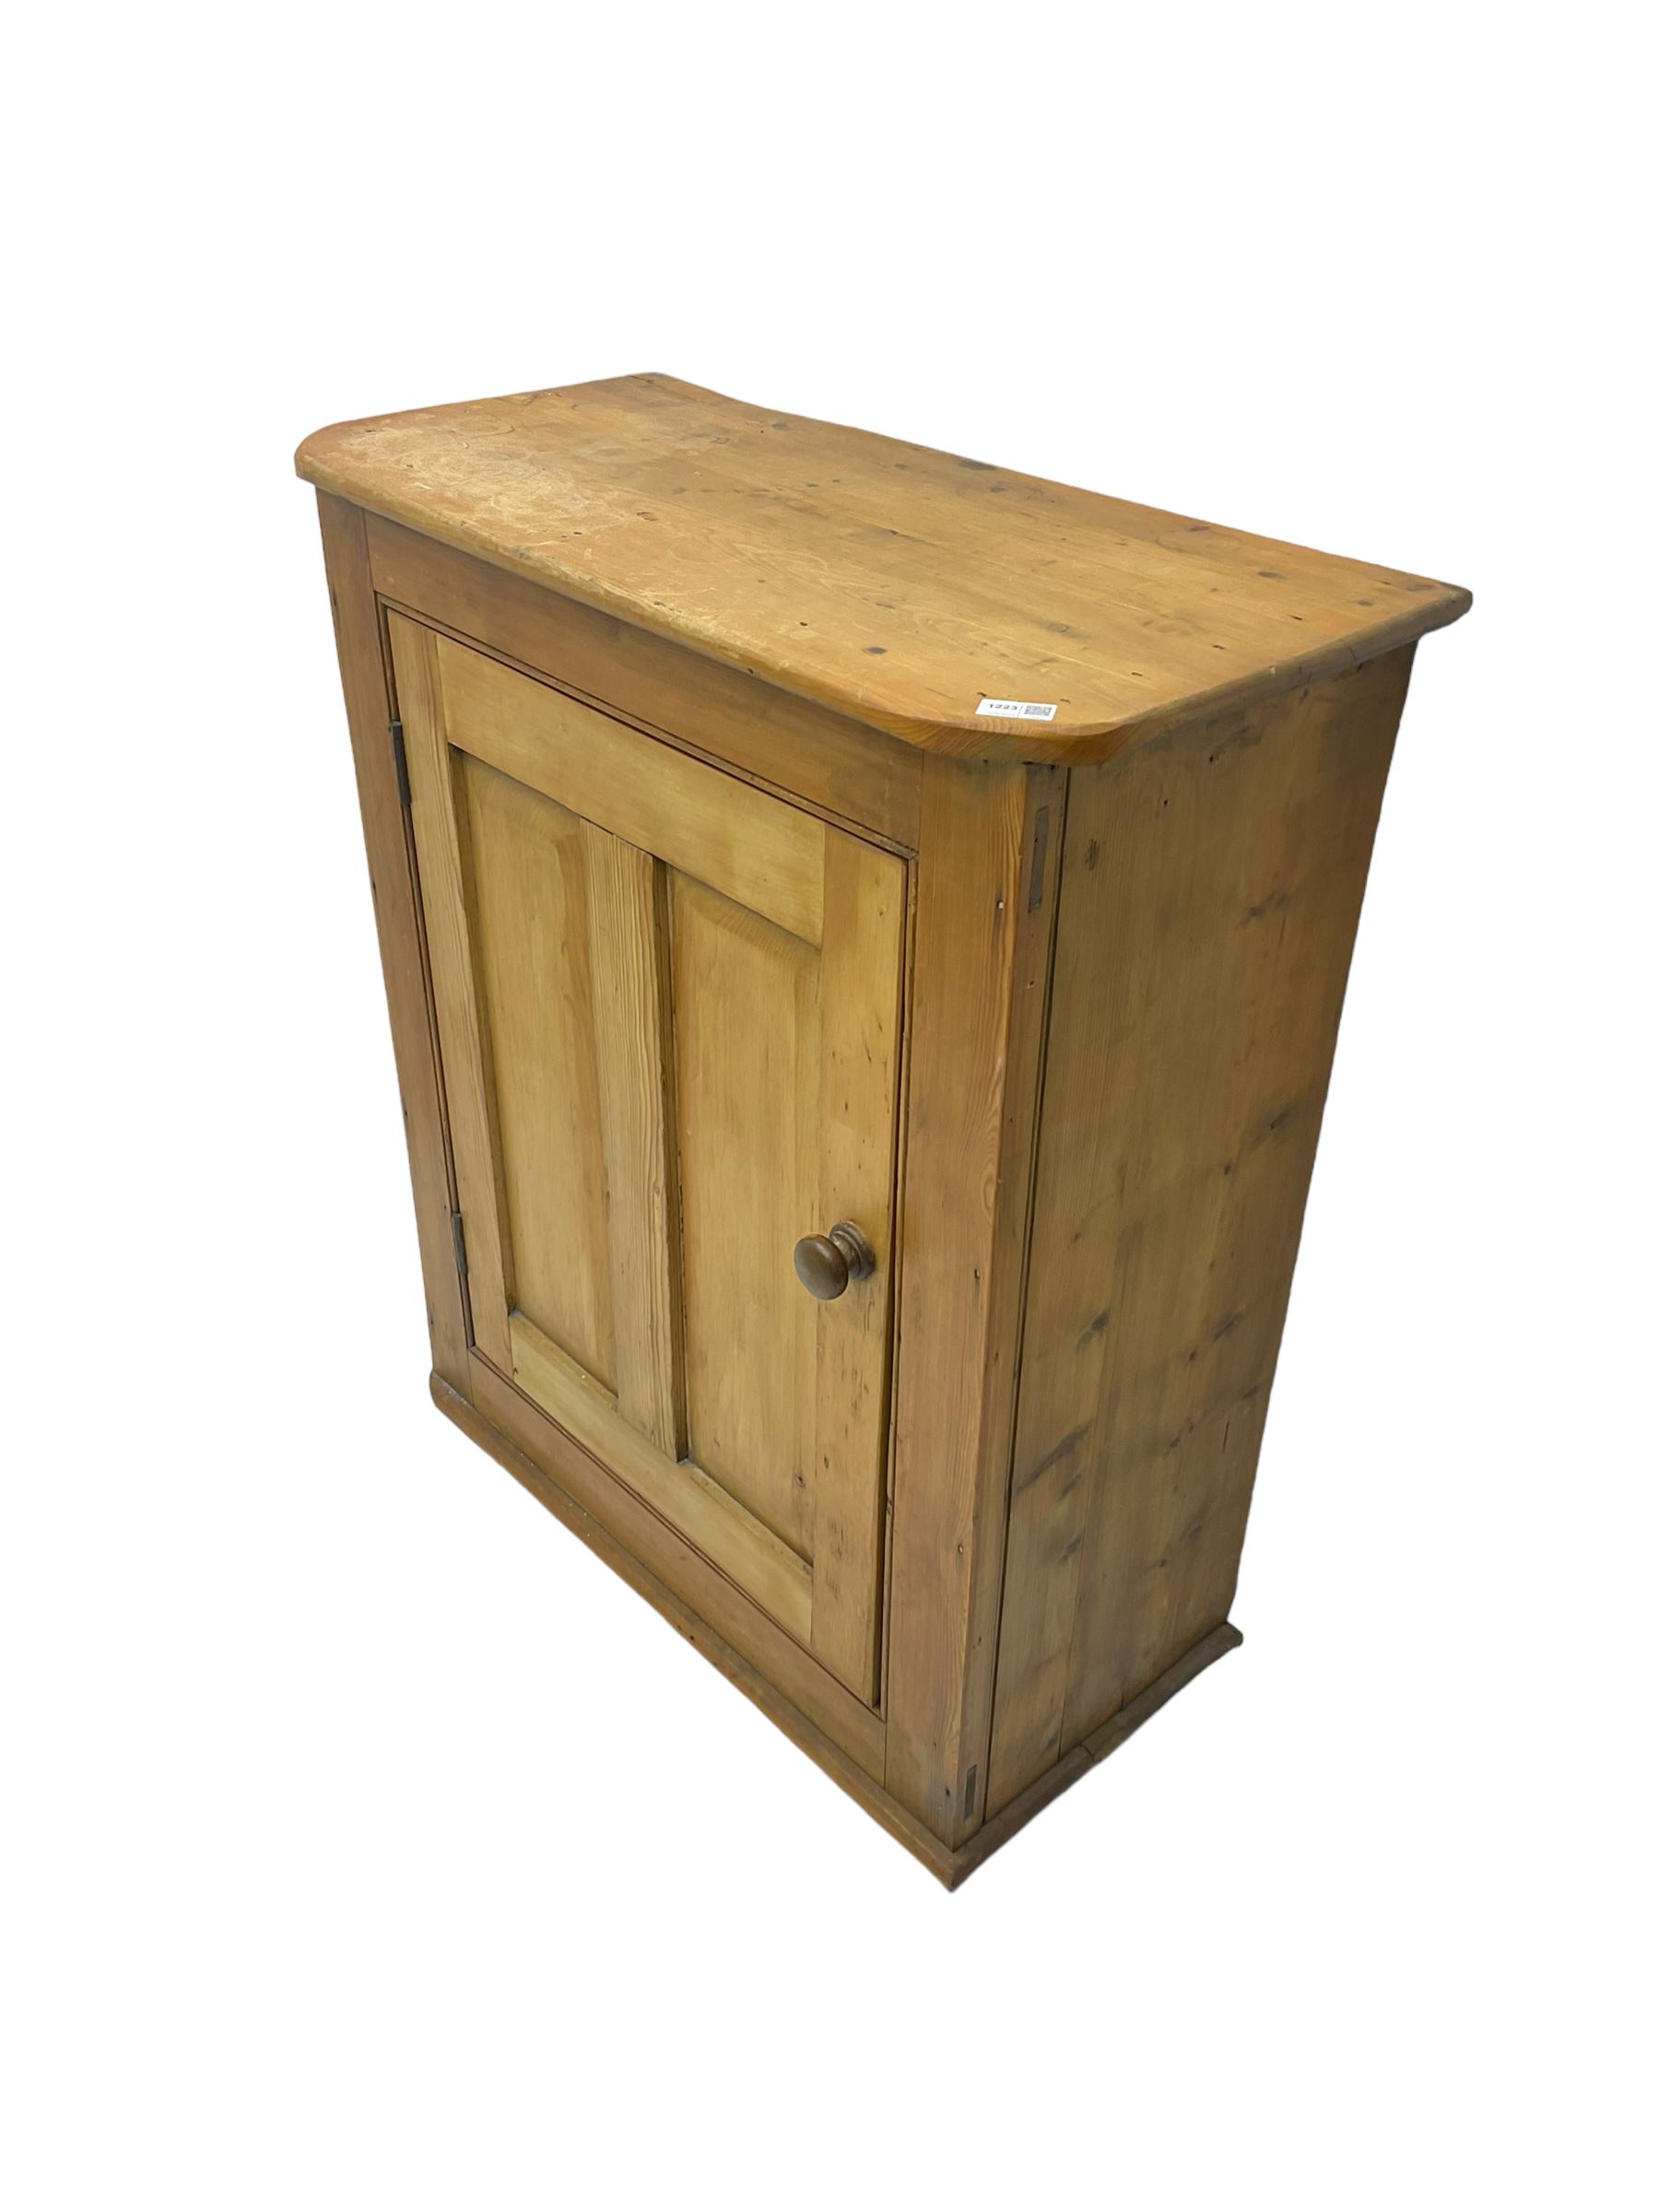 Pine standing cupboard - Image 4 of 7